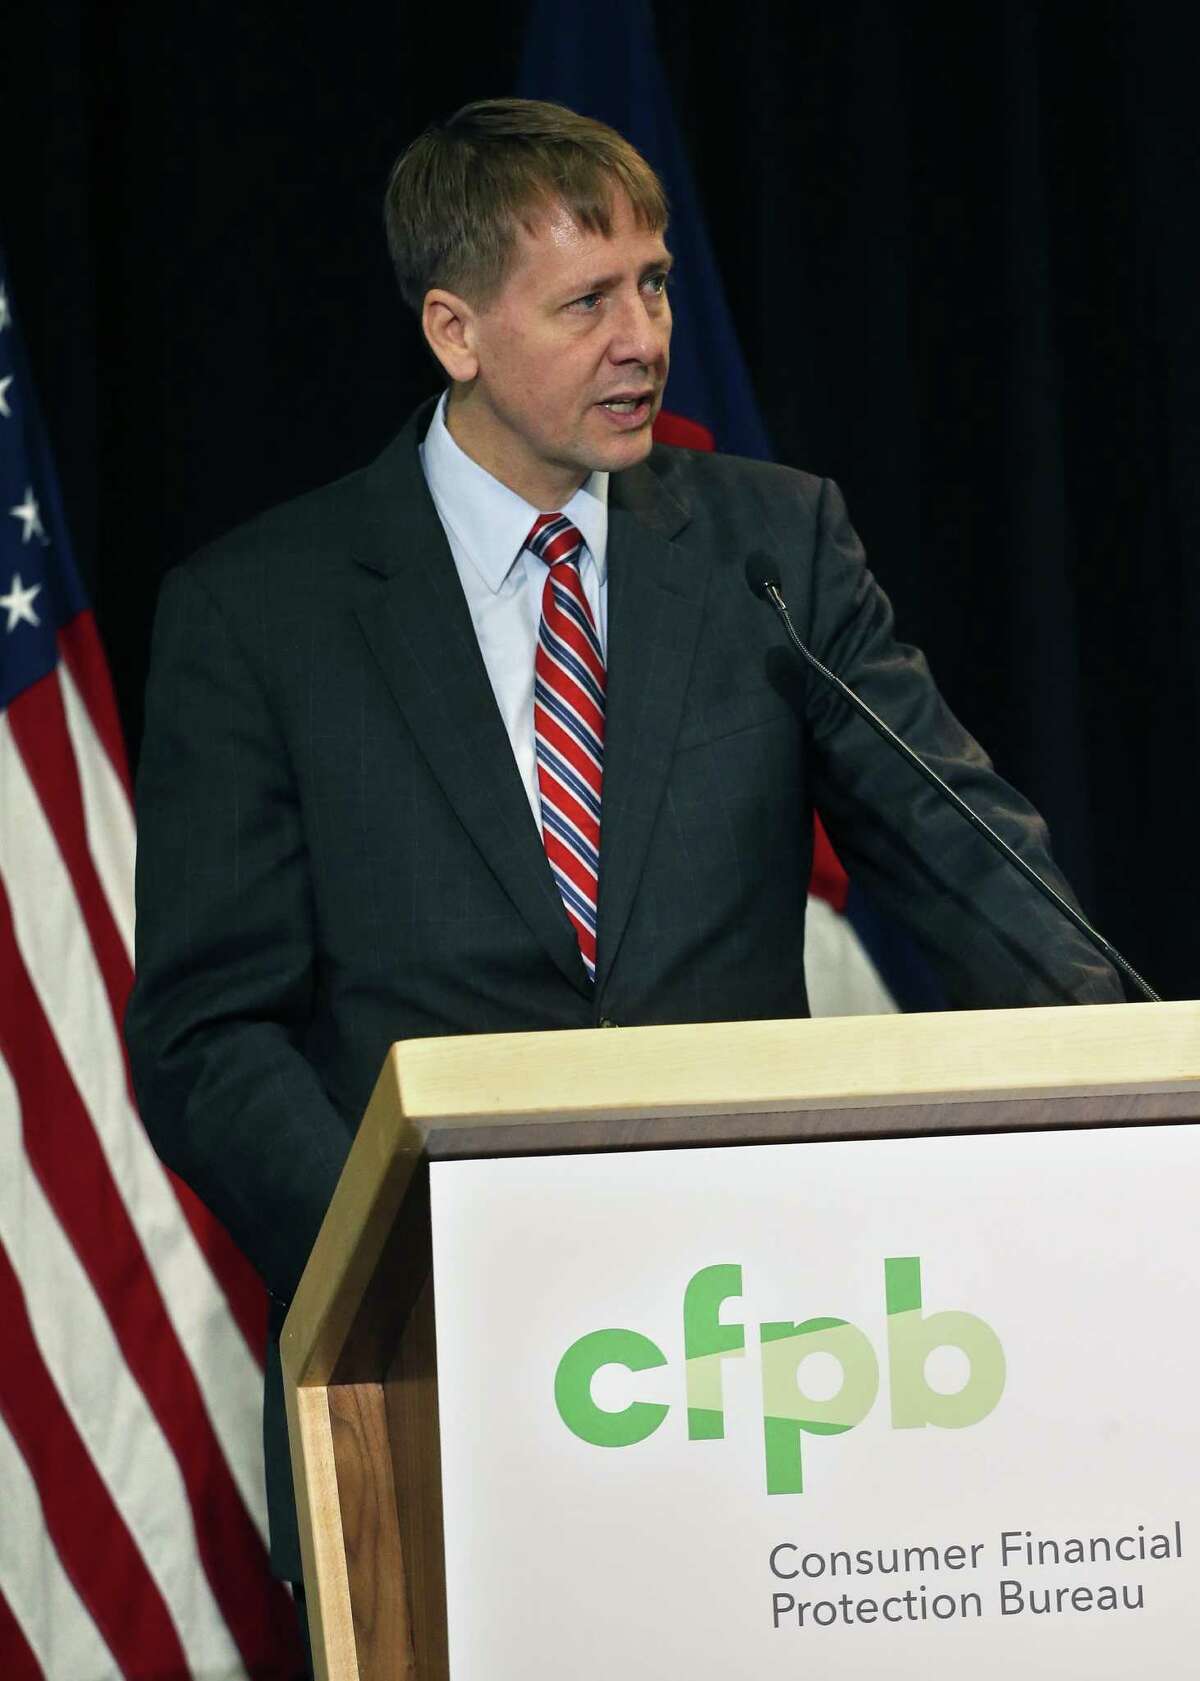 Consumer Financial Protection Bureau Director Richard Cordray speaks during a a hearing in Denver where he discussed his agency's proposal on arbitration, in Denver, Colo., Wednesday, Oct. 7, 2015. If enacted, the plan would severely curtail a contentious practice called mandatory arbitration, which consumer advocates have long argued does a disservice to people who have disputes with banks, credit card issuers and other financial service providers. (AP Photo/Brennan Linsley)